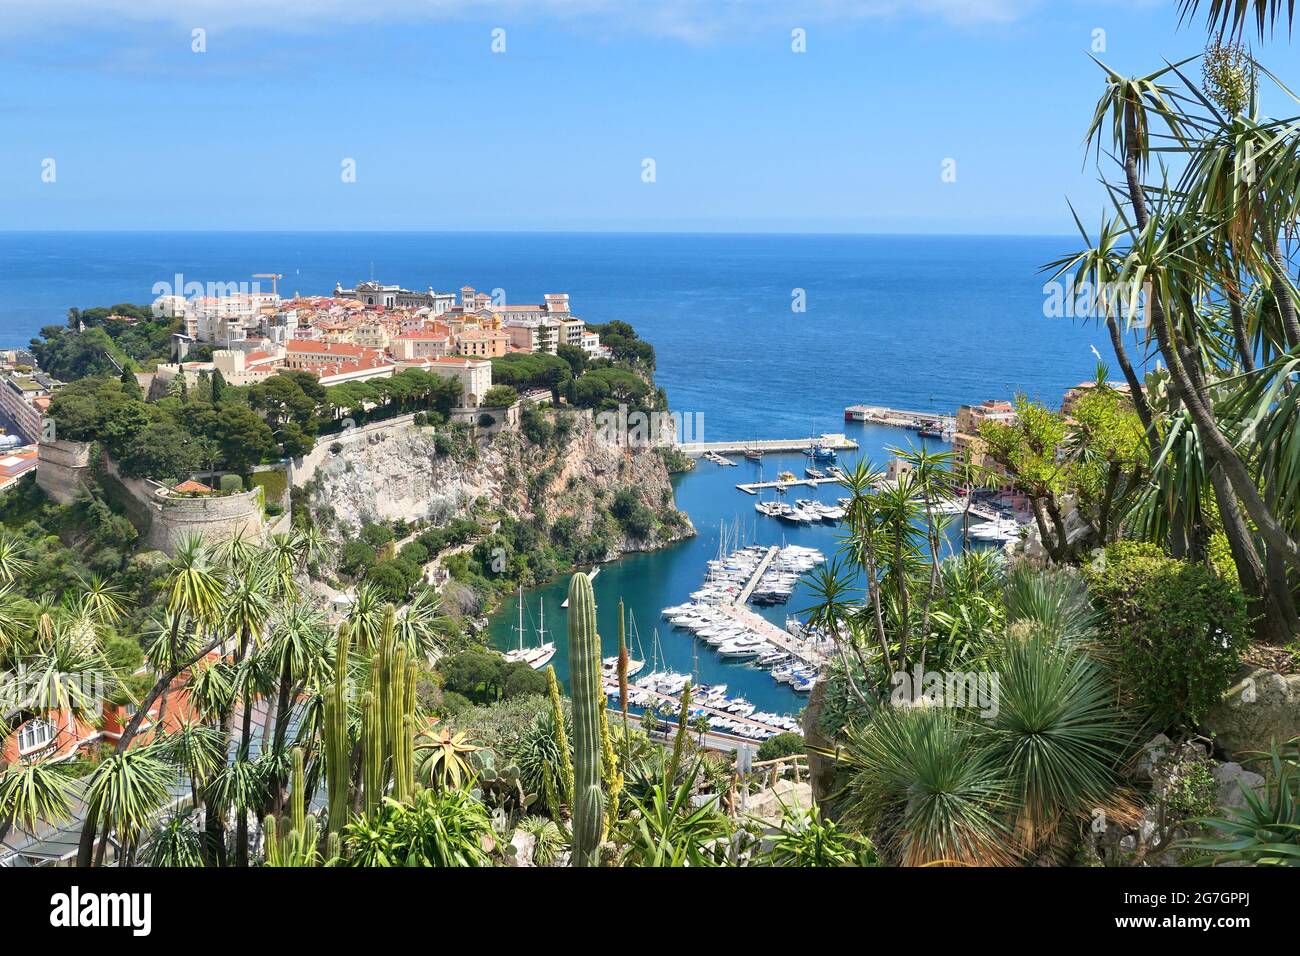 Monaco prince's palace hill and Mediterranean sea view from exotic garden Stock Photo